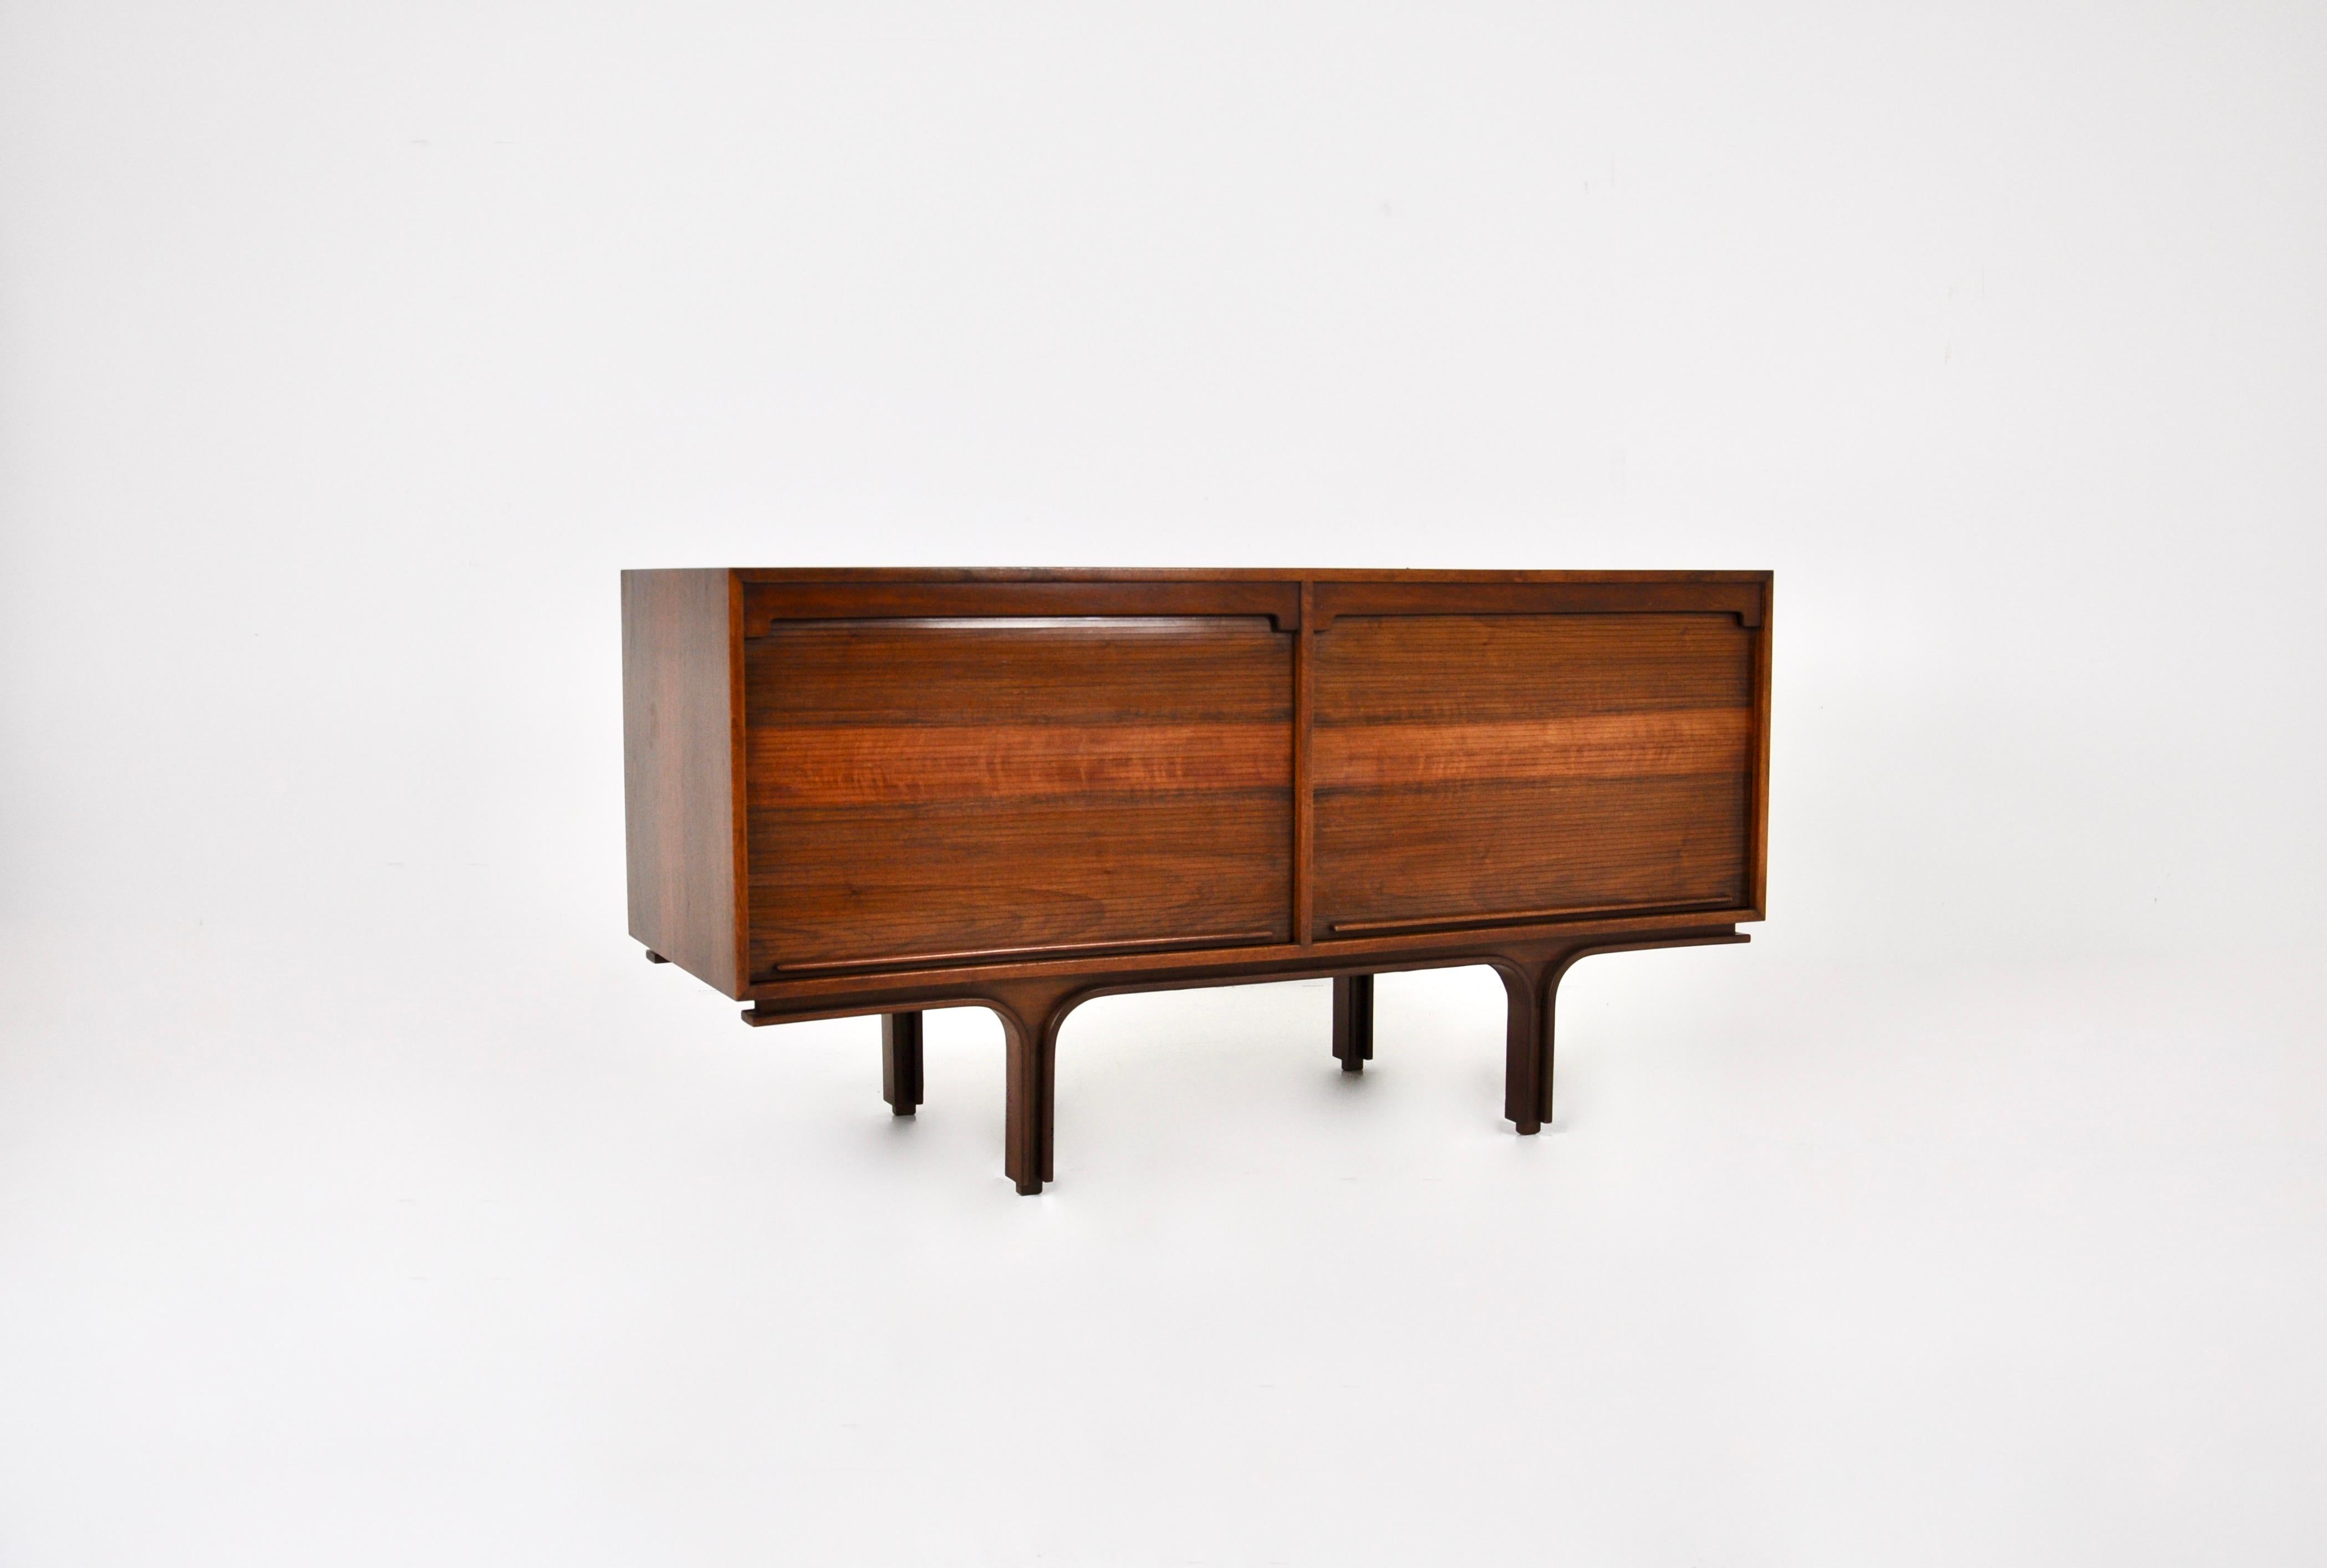 Wooden sideboard with 2 sliding doors, each compartment contains a shelf. Stamped Bernini on the inside. Wear due to time and age of the sideboard